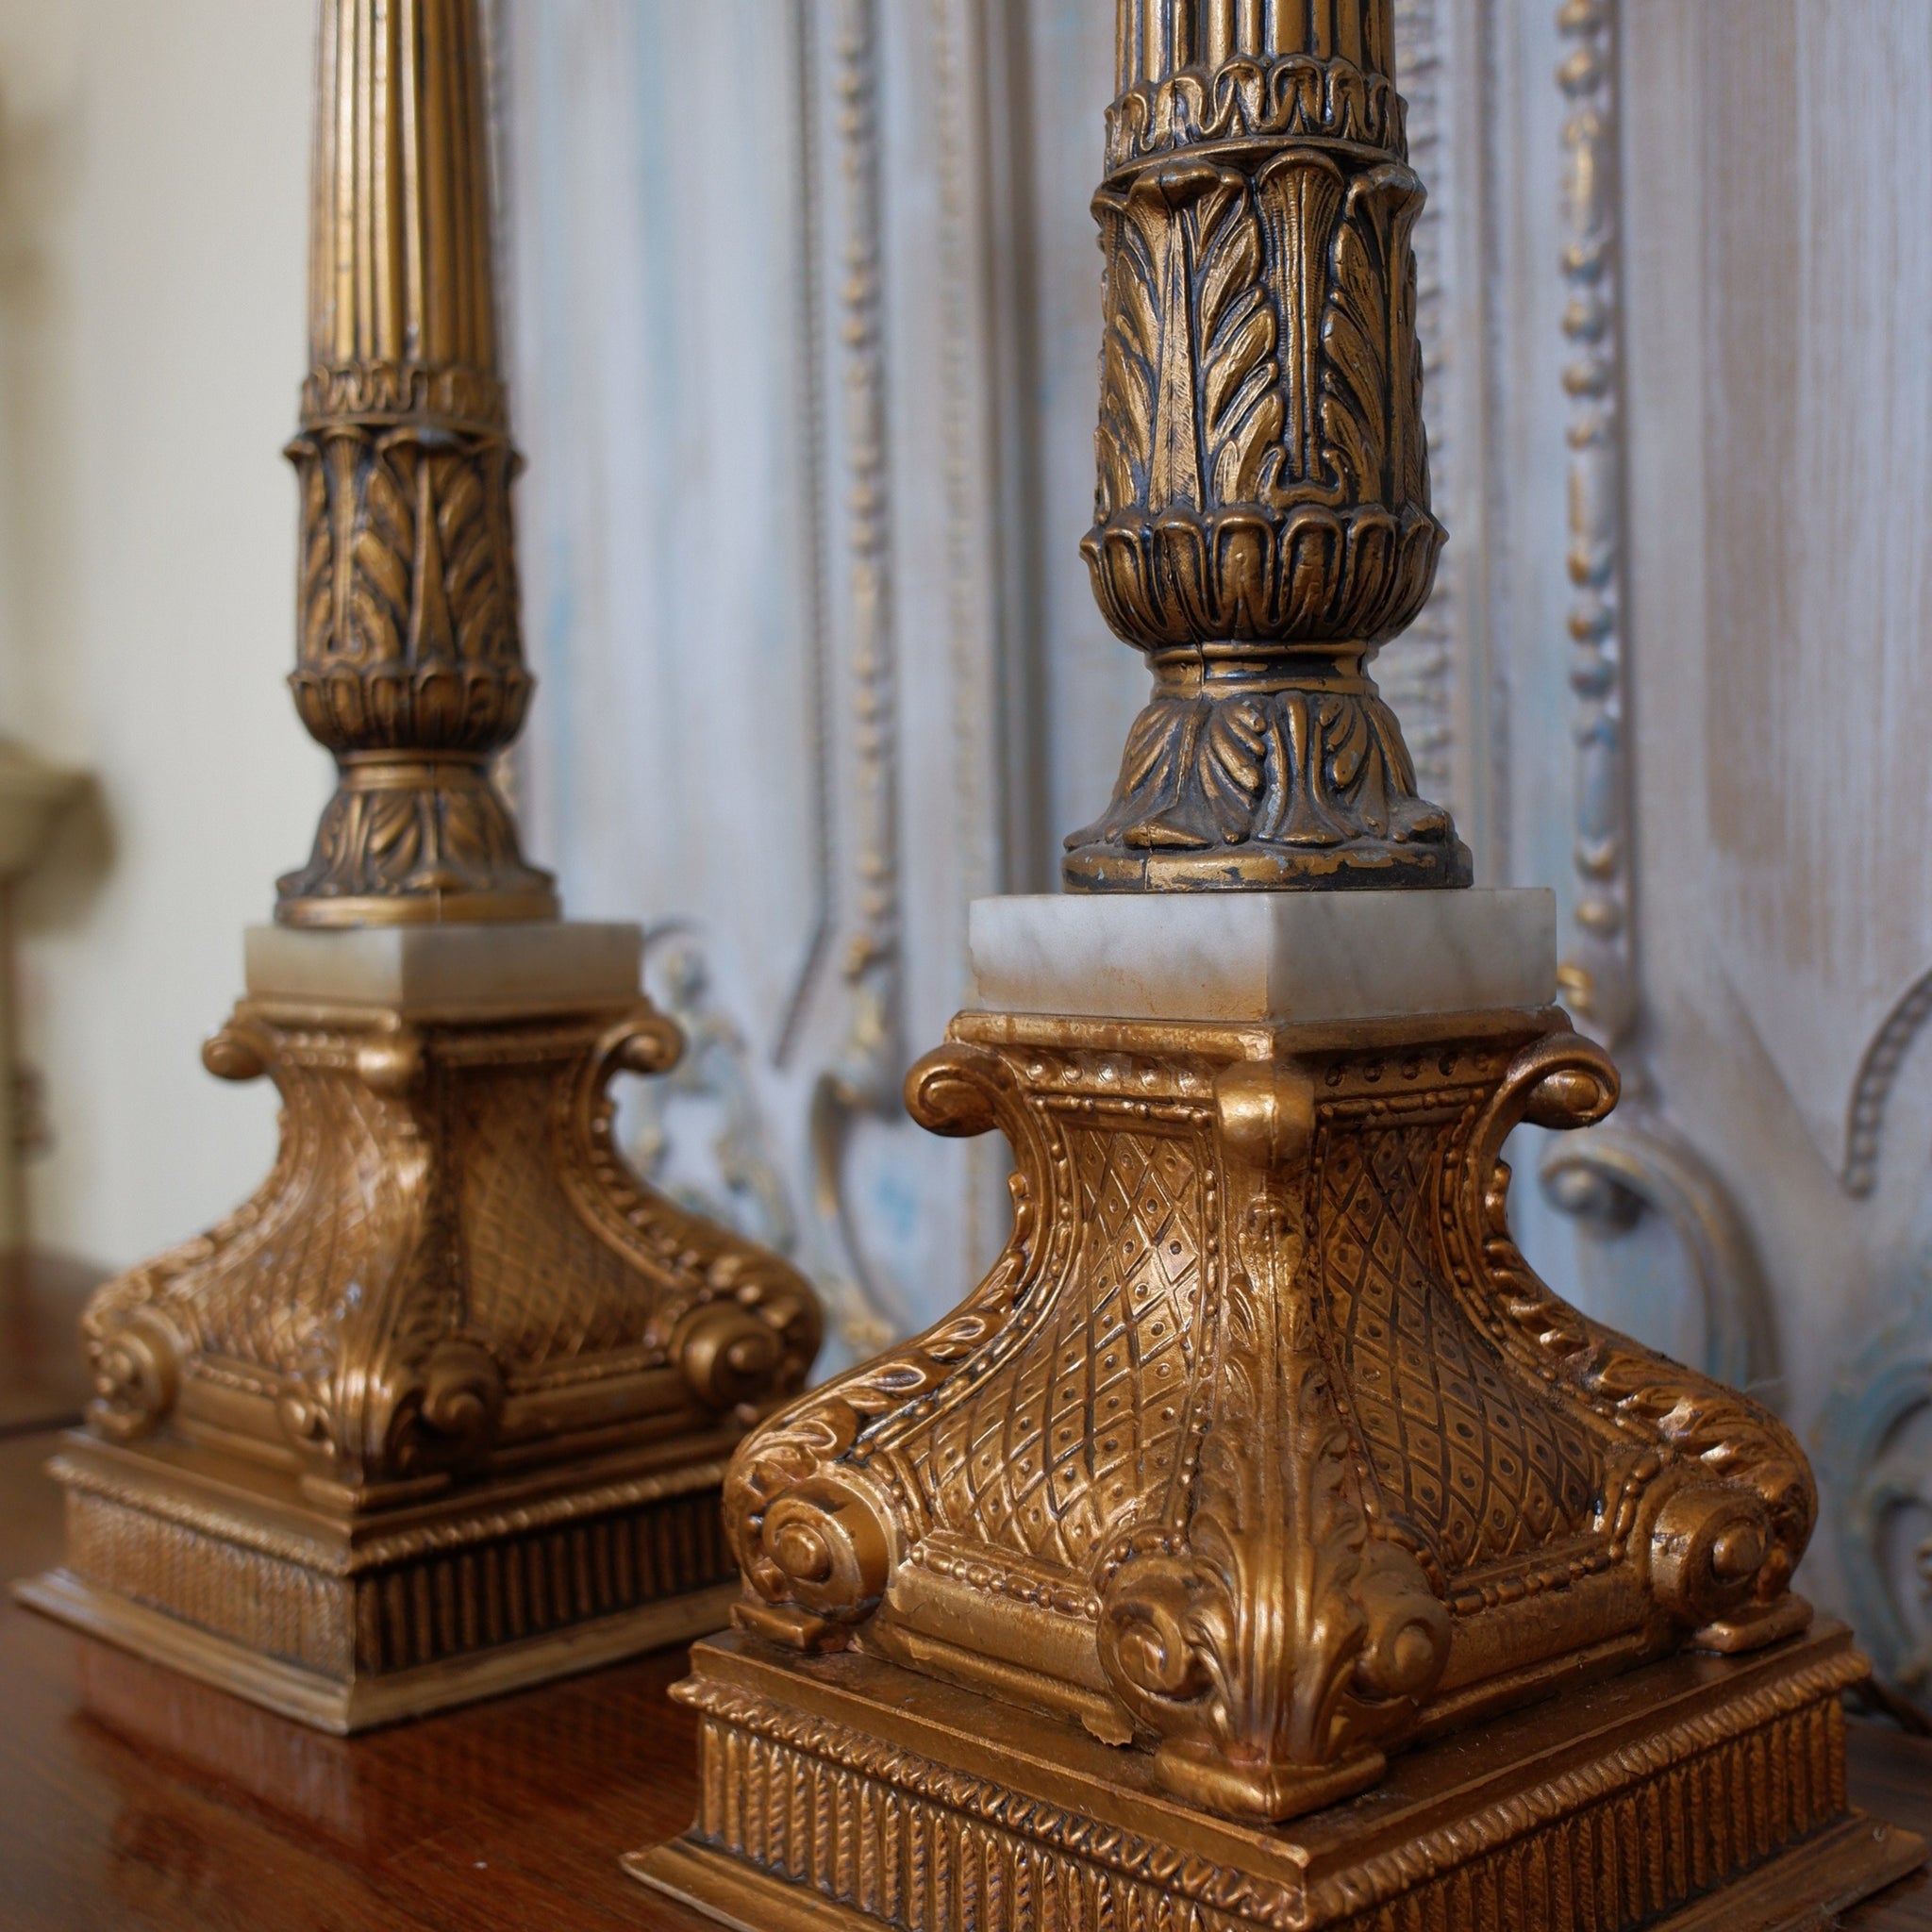 Pair of Antique Tall FRENCH Ornate METAL Gold Column Marble Rustic Table Lamps